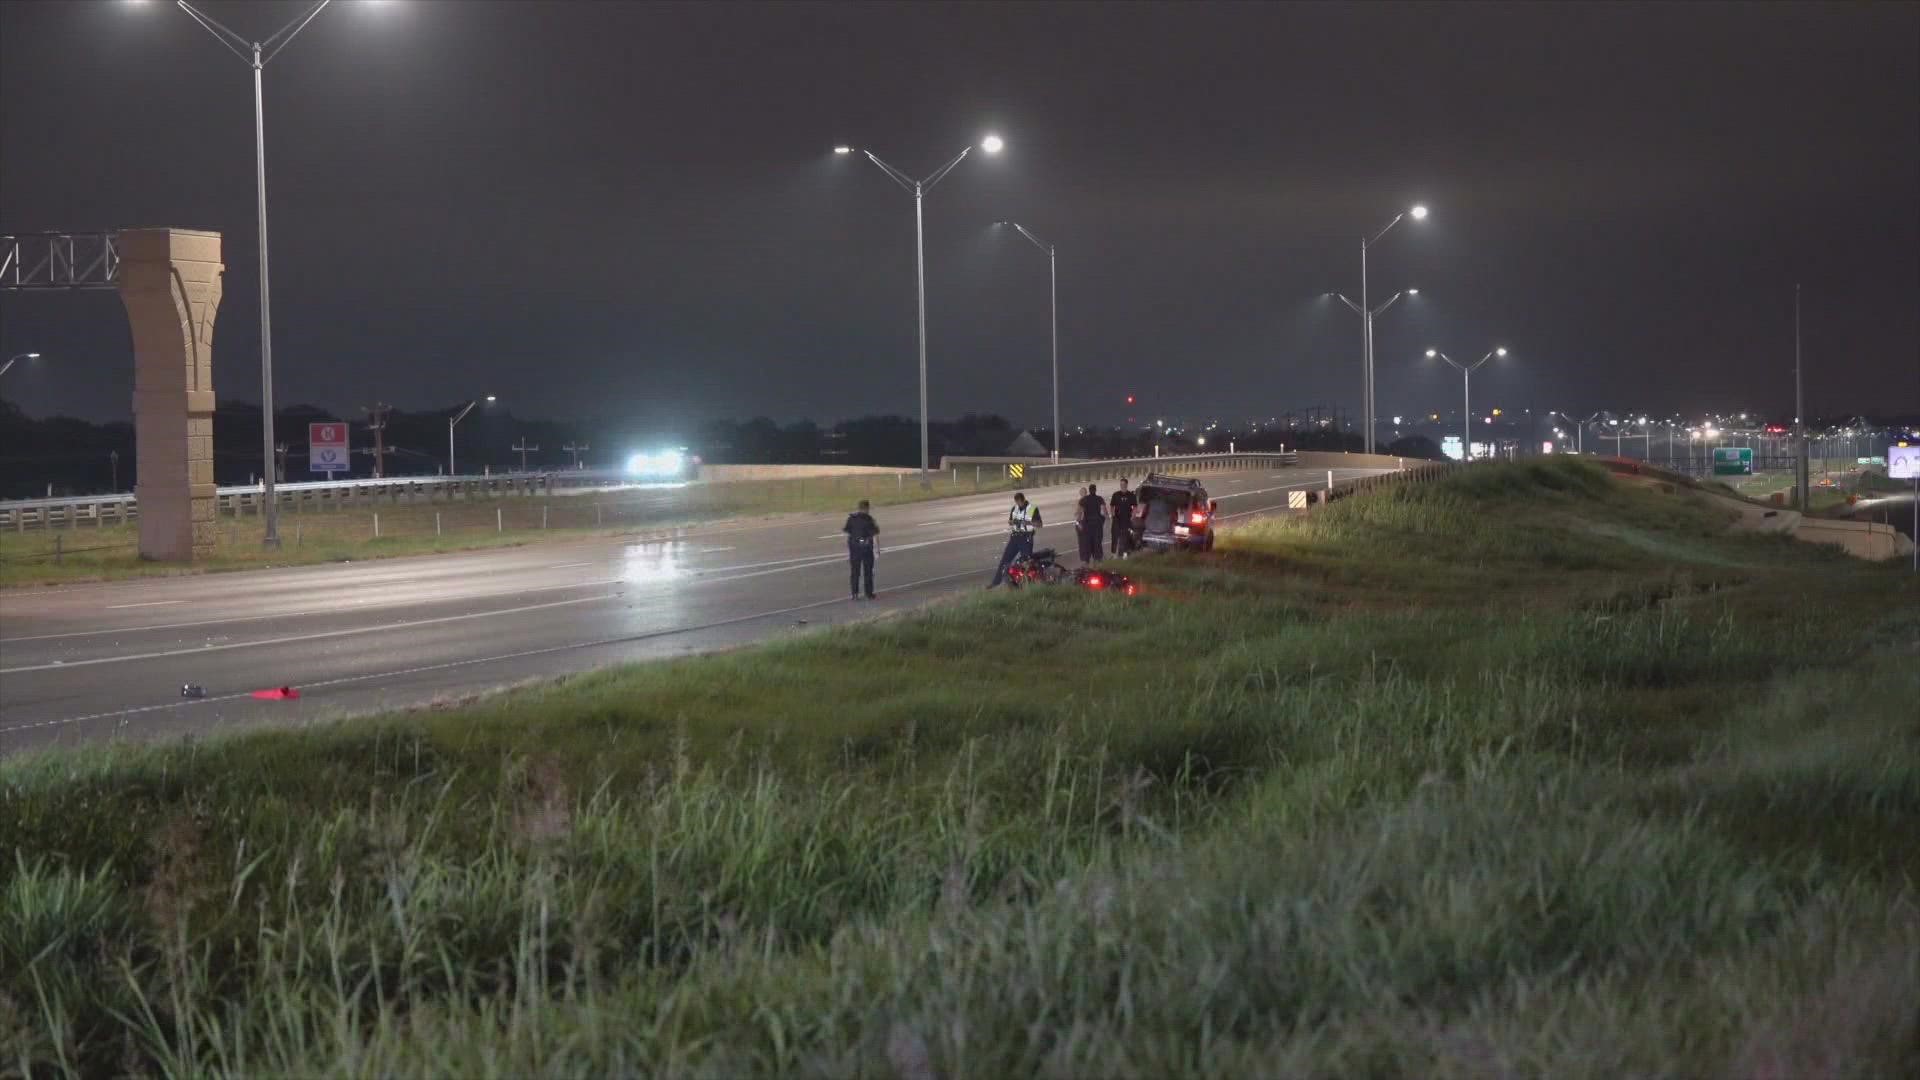 When police arrived on the scene, they found the motorcyclist dead in the median.